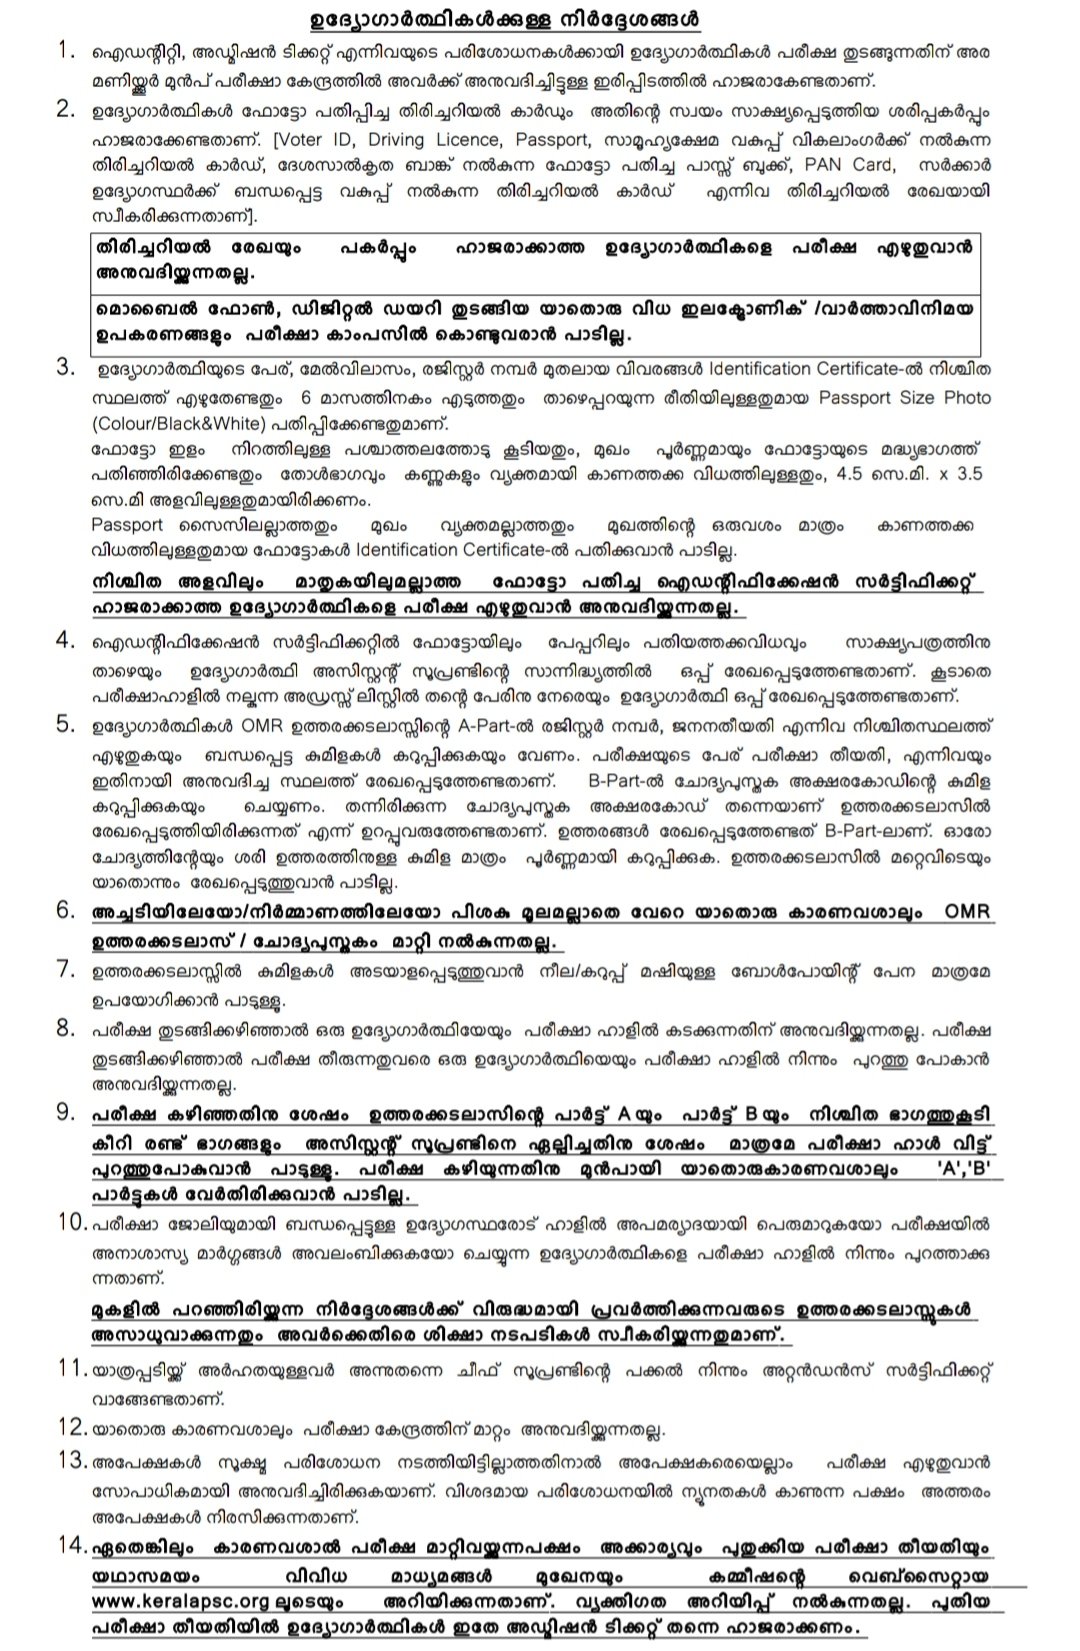 Kerala PSC Exam Instructions to Candidates Appearing for OMR Test 